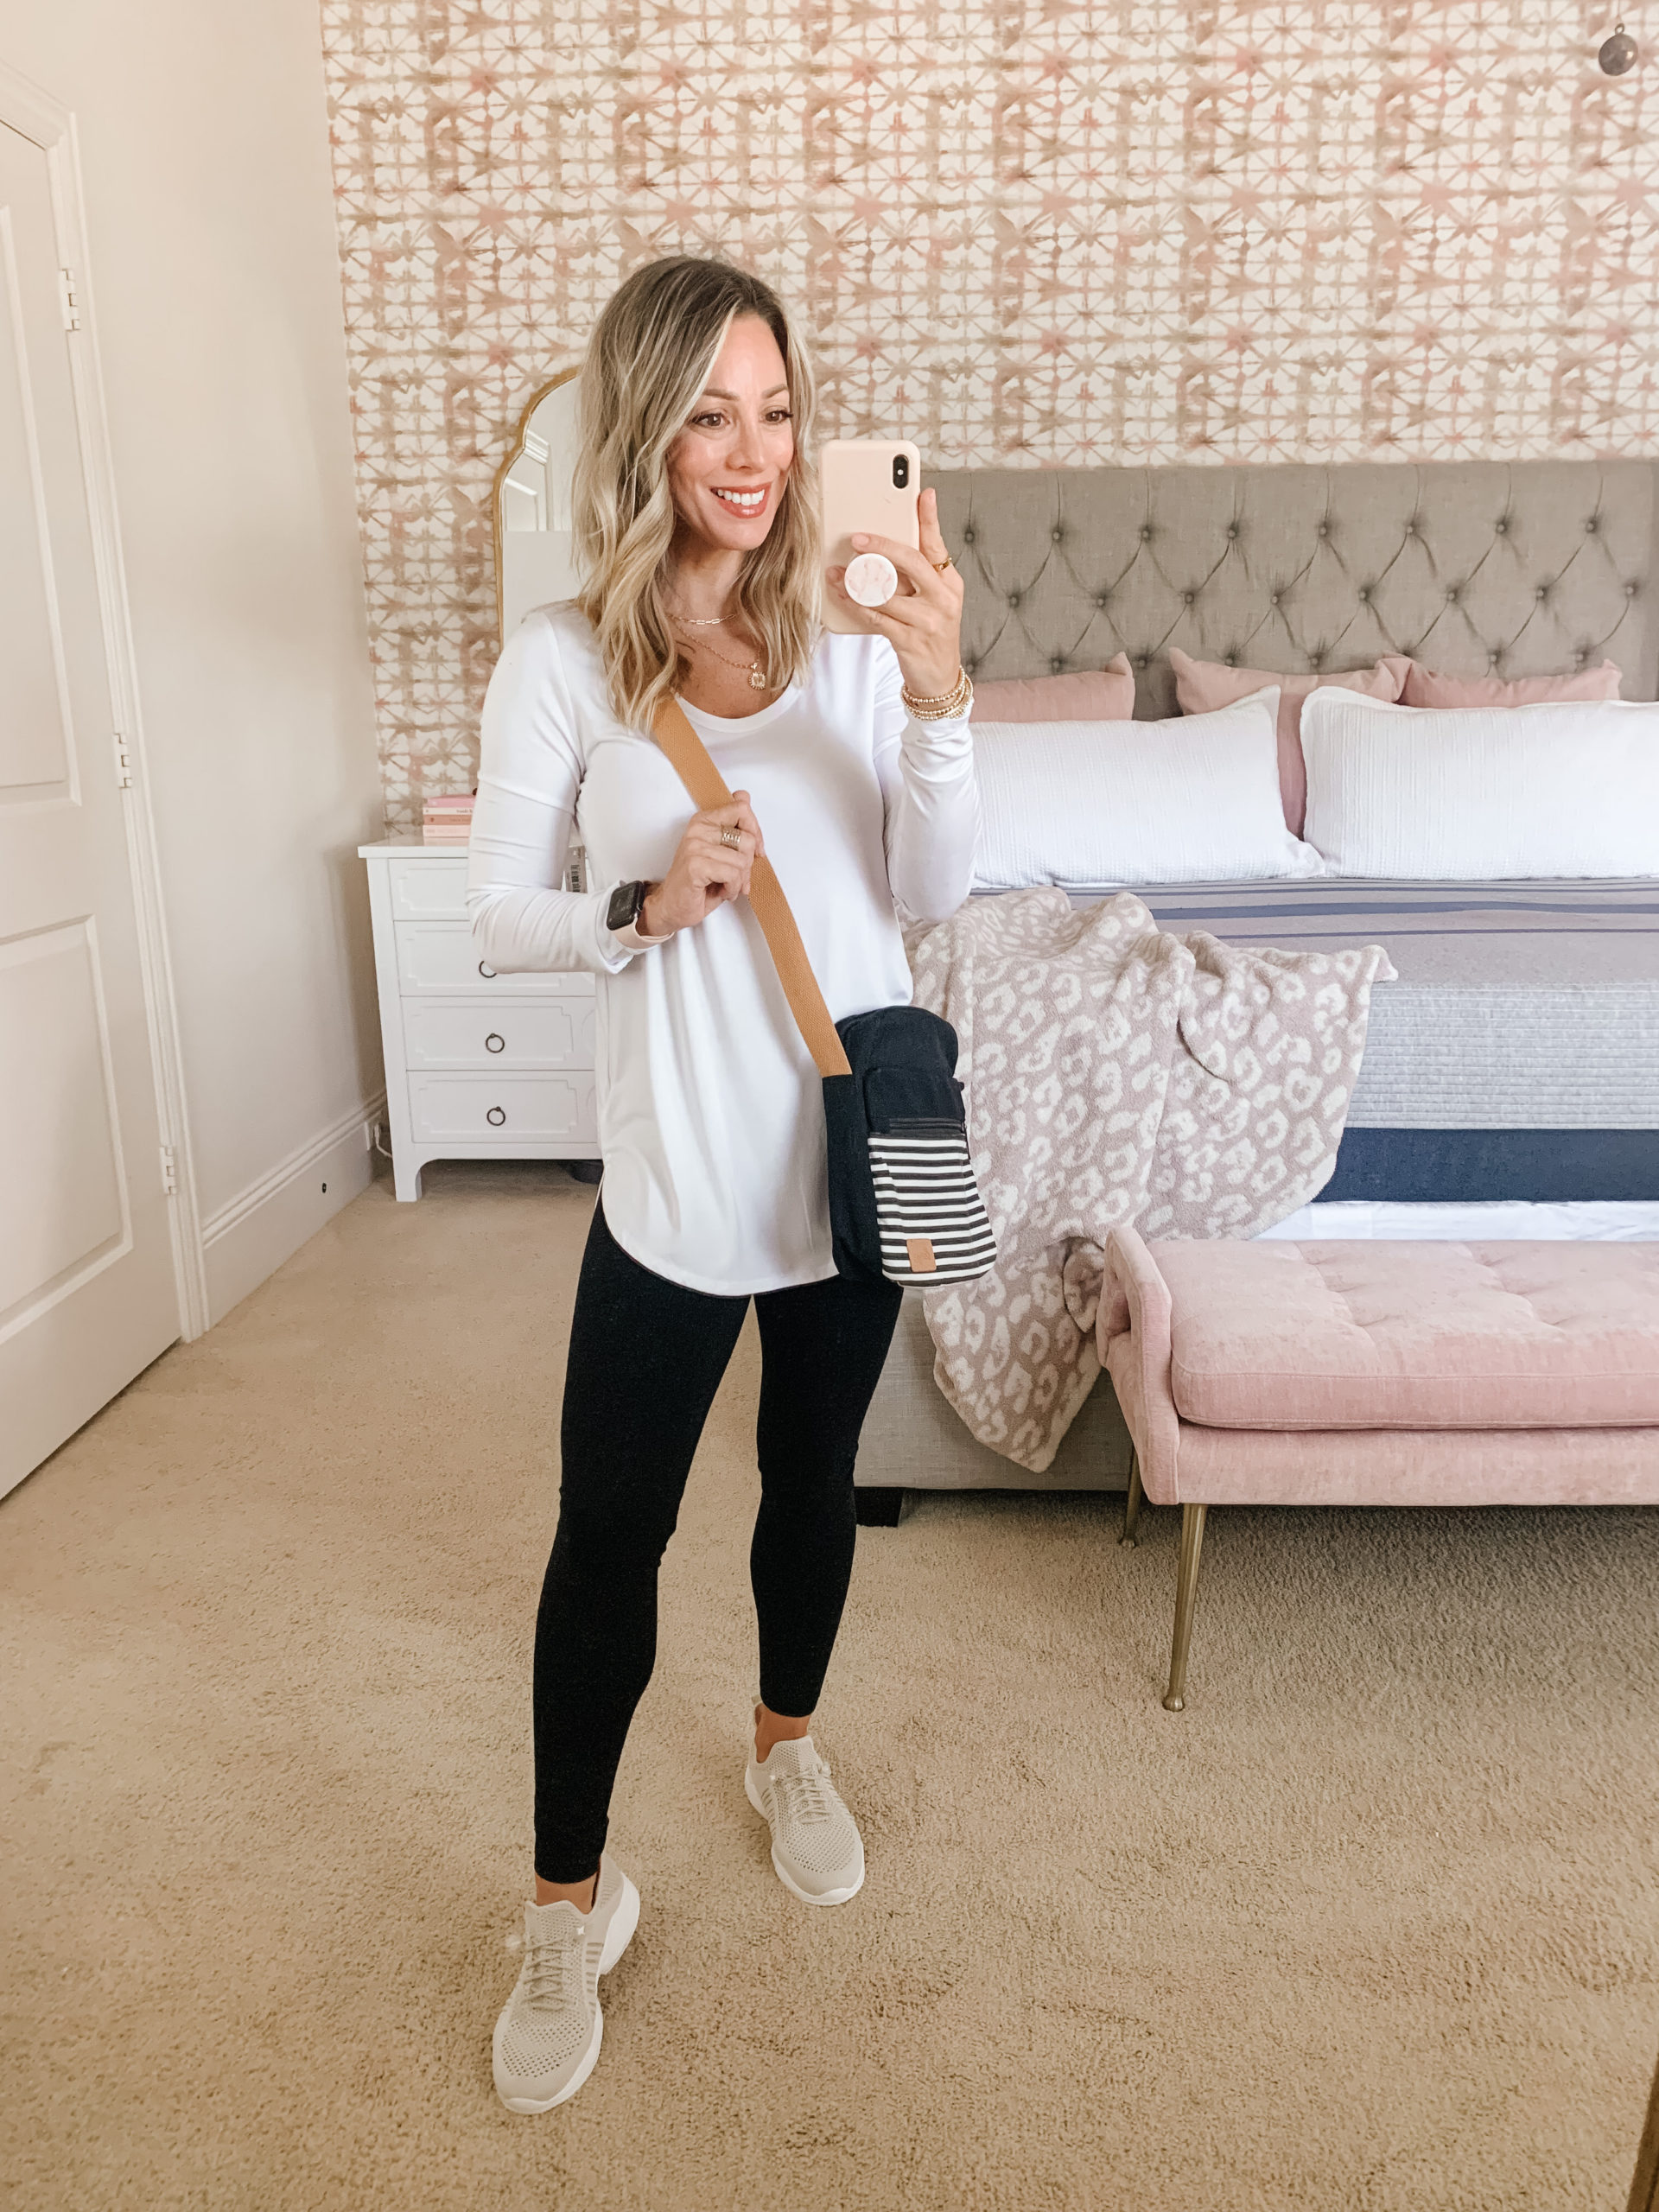 Amazon Fashion, Tunic Tee and Leggings with Slip on Sneakers 